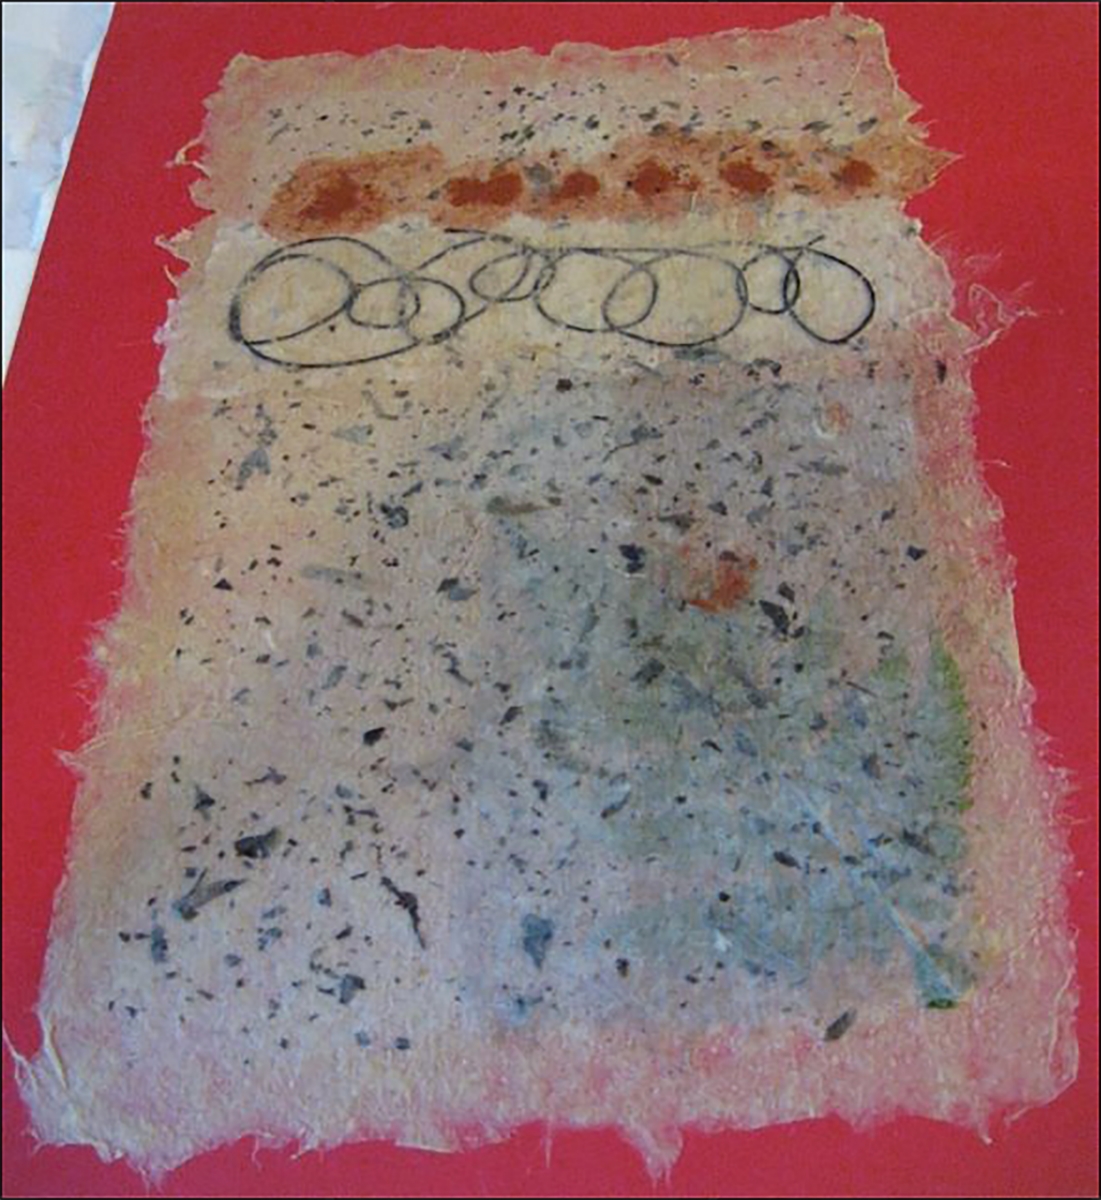  This is Carol's second day of papermaking. She also took the workshop Introduction to papermaking and came back for a second day with Liliana to make more paper. This piece contains a variety of pulps including artemisia and abaca, and some colored 